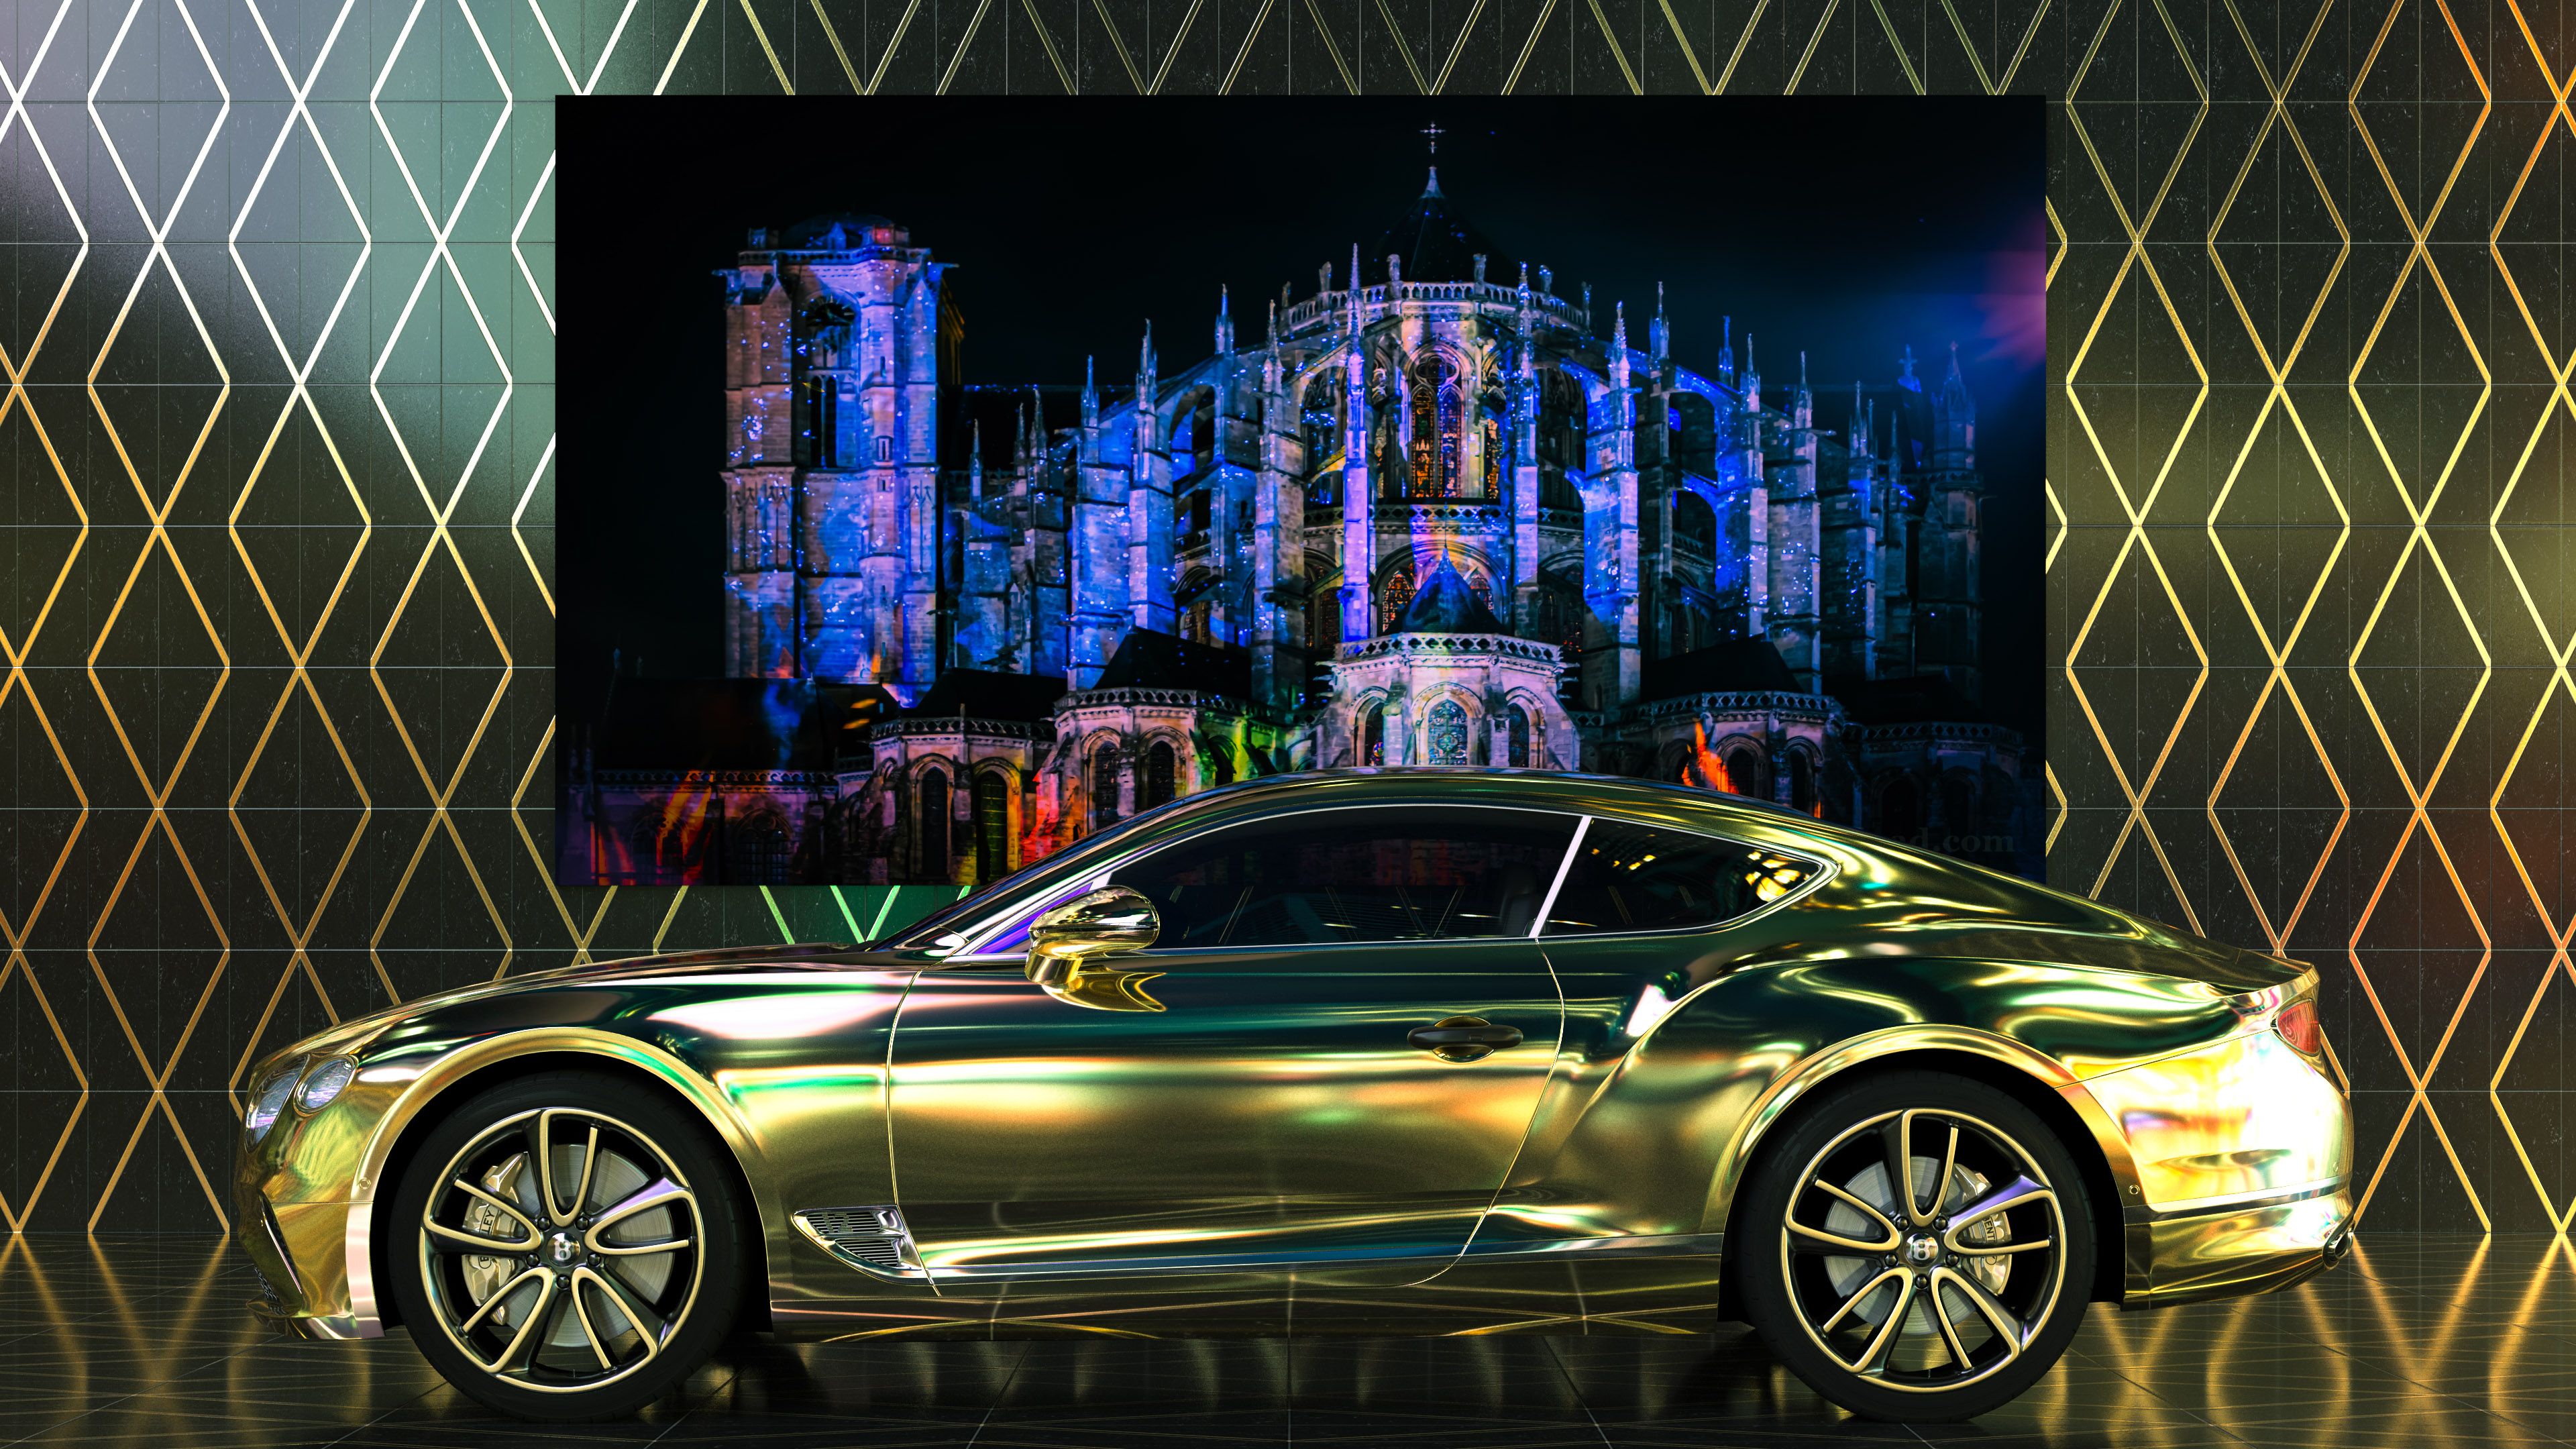 Our cool car wallpaper collection features the Bentley Continental GT, a blend of luxury and performance, ready to bring a touch of elegance to your screen.